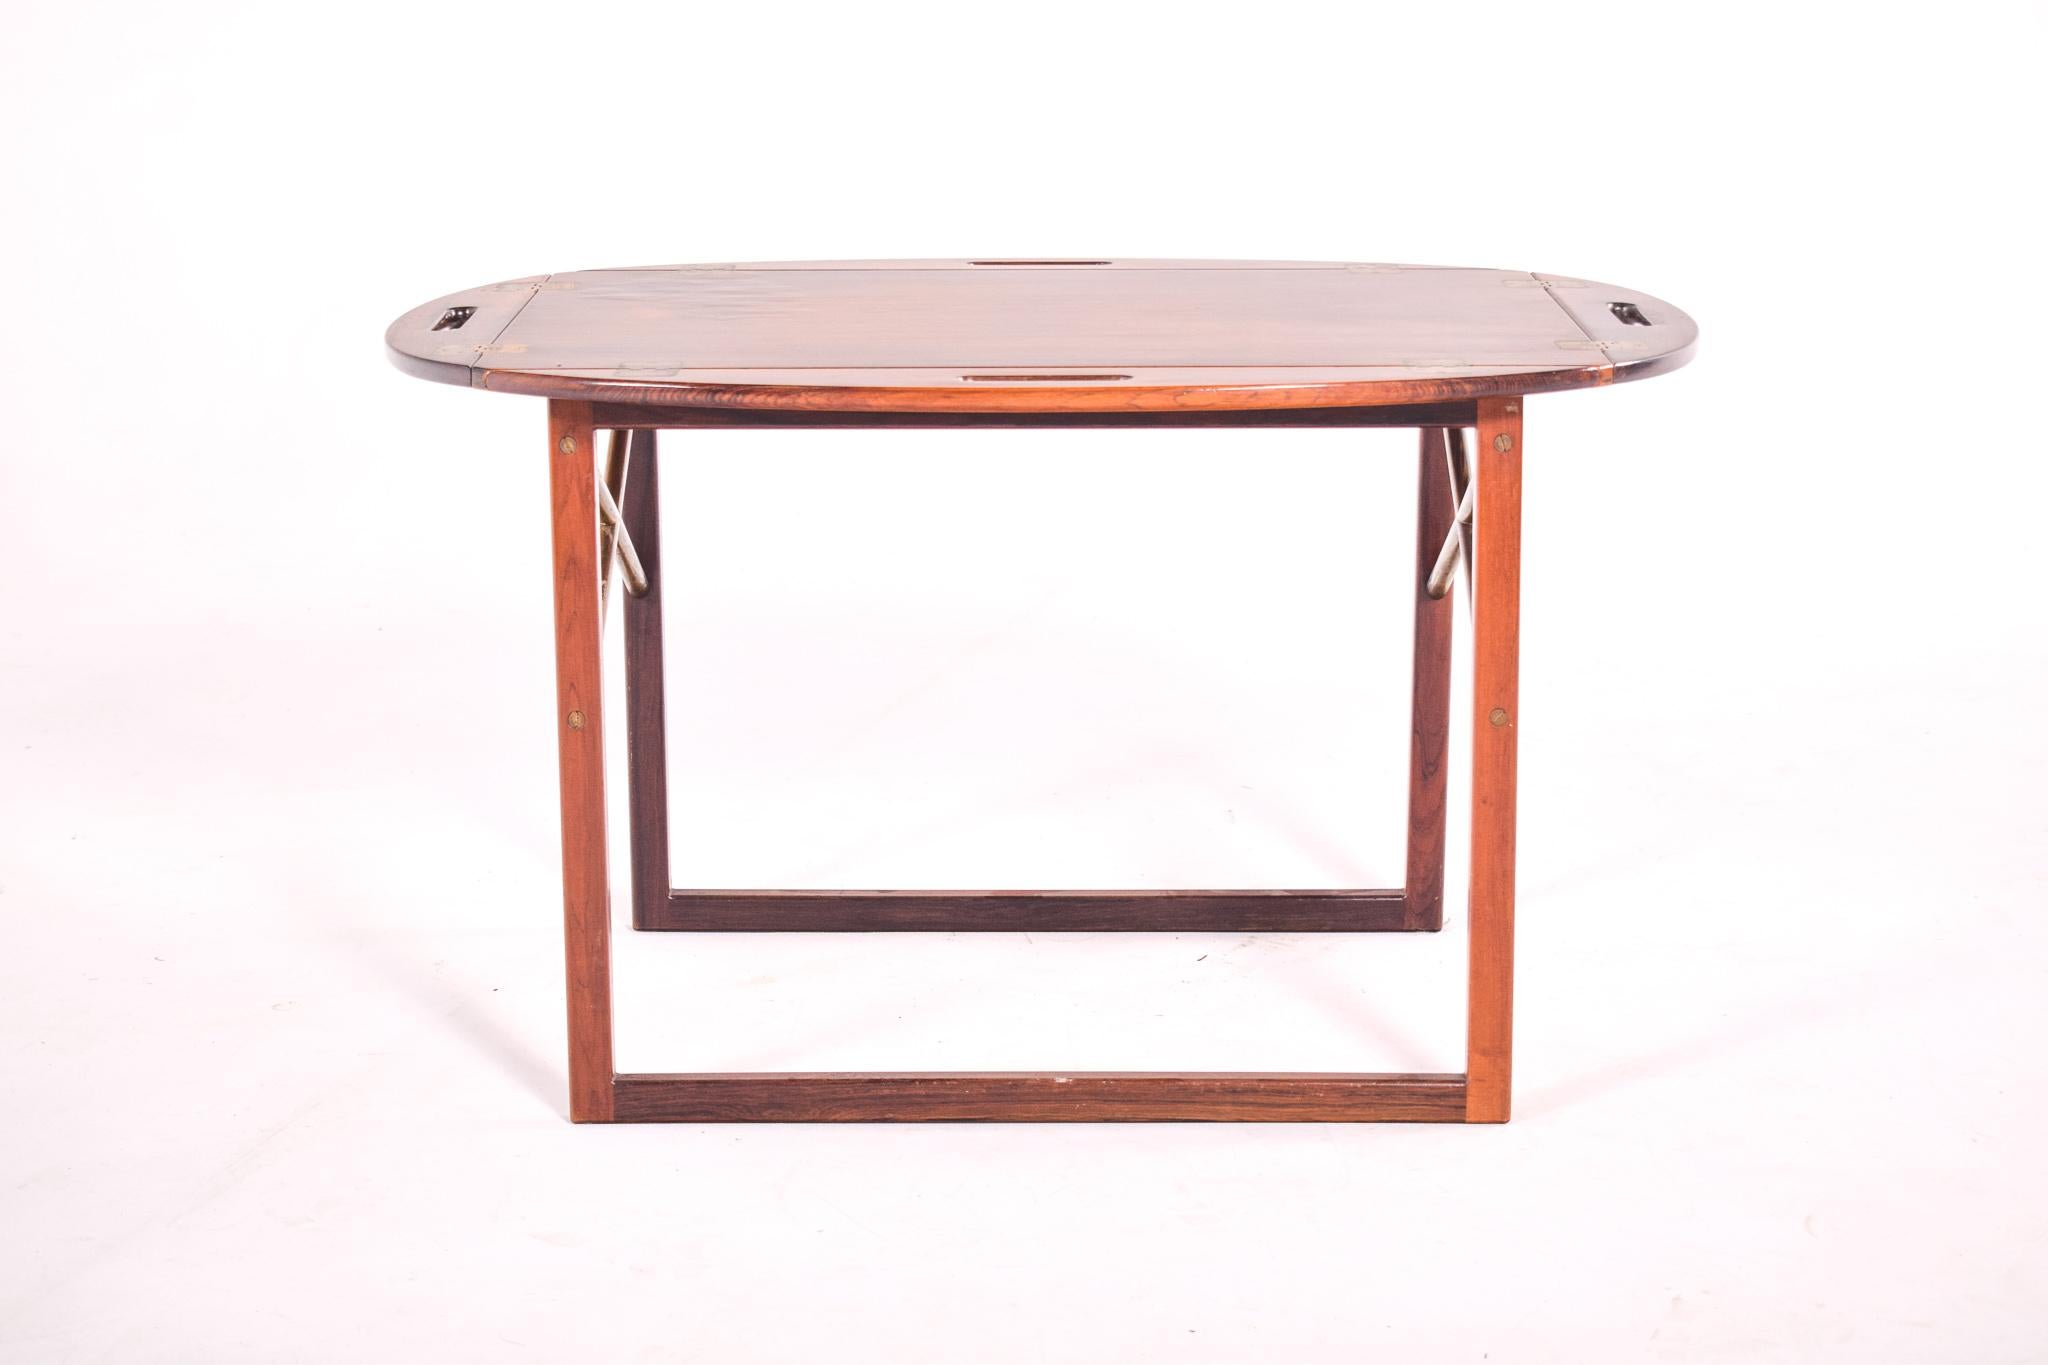 Excellent tray table in rosewood with brass cross stretchers. Danish modern design by Svend Langkilde for Illums Bolighus. removable and hinged top.